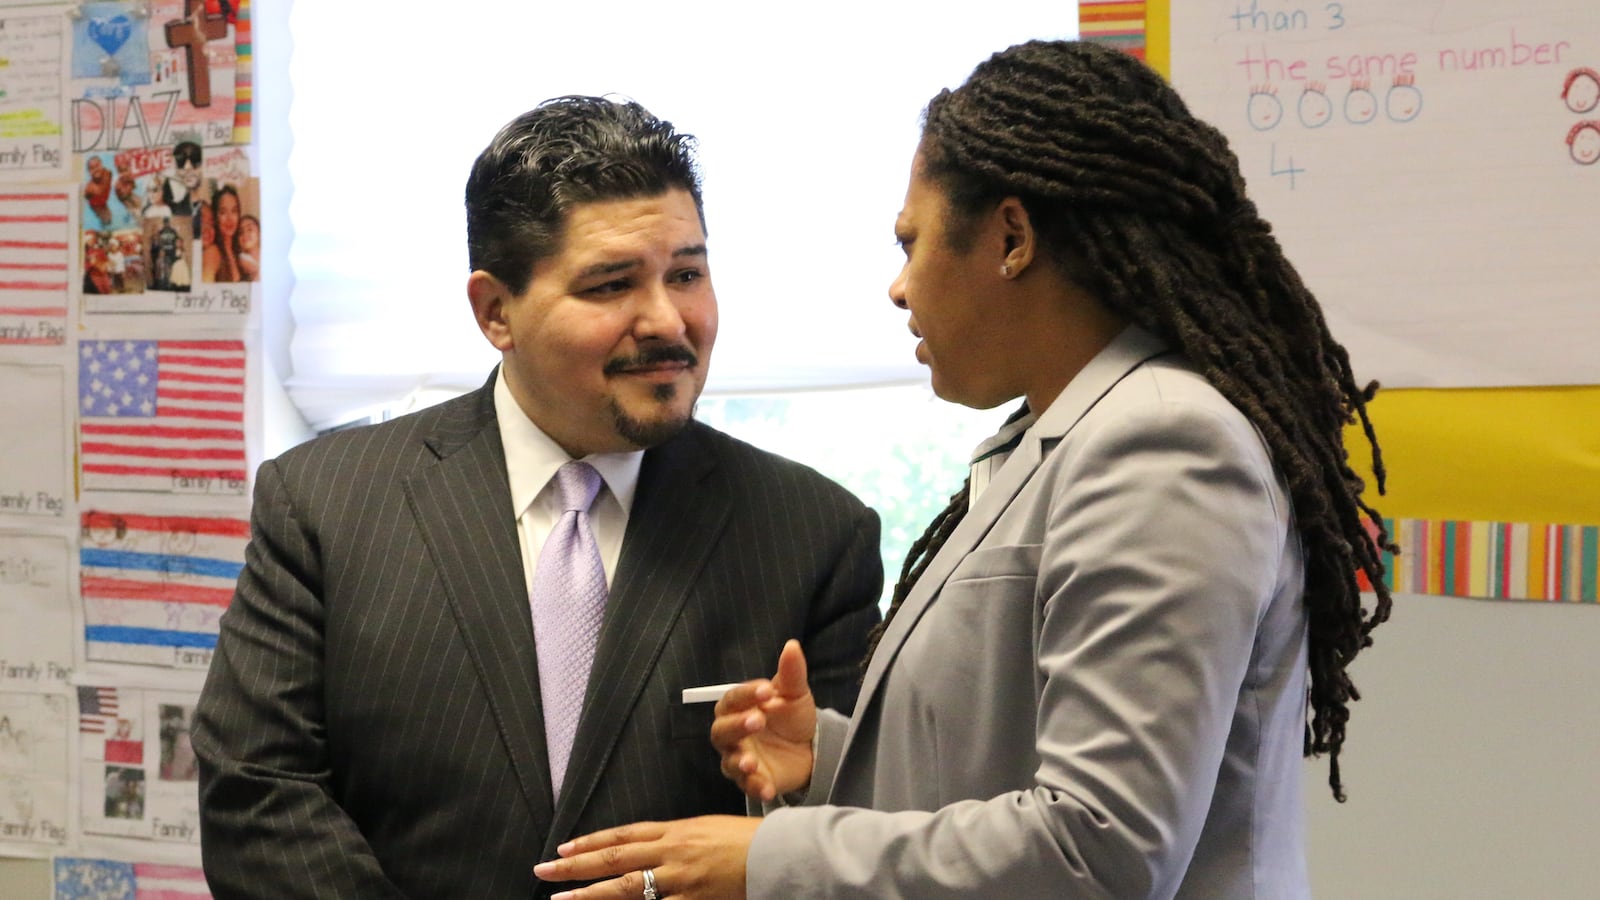 Chancellor Richard Carranza visits the Bronx Charter School for Excellence and speaks to Charlene Reid, the network's Chief Executive Officer.